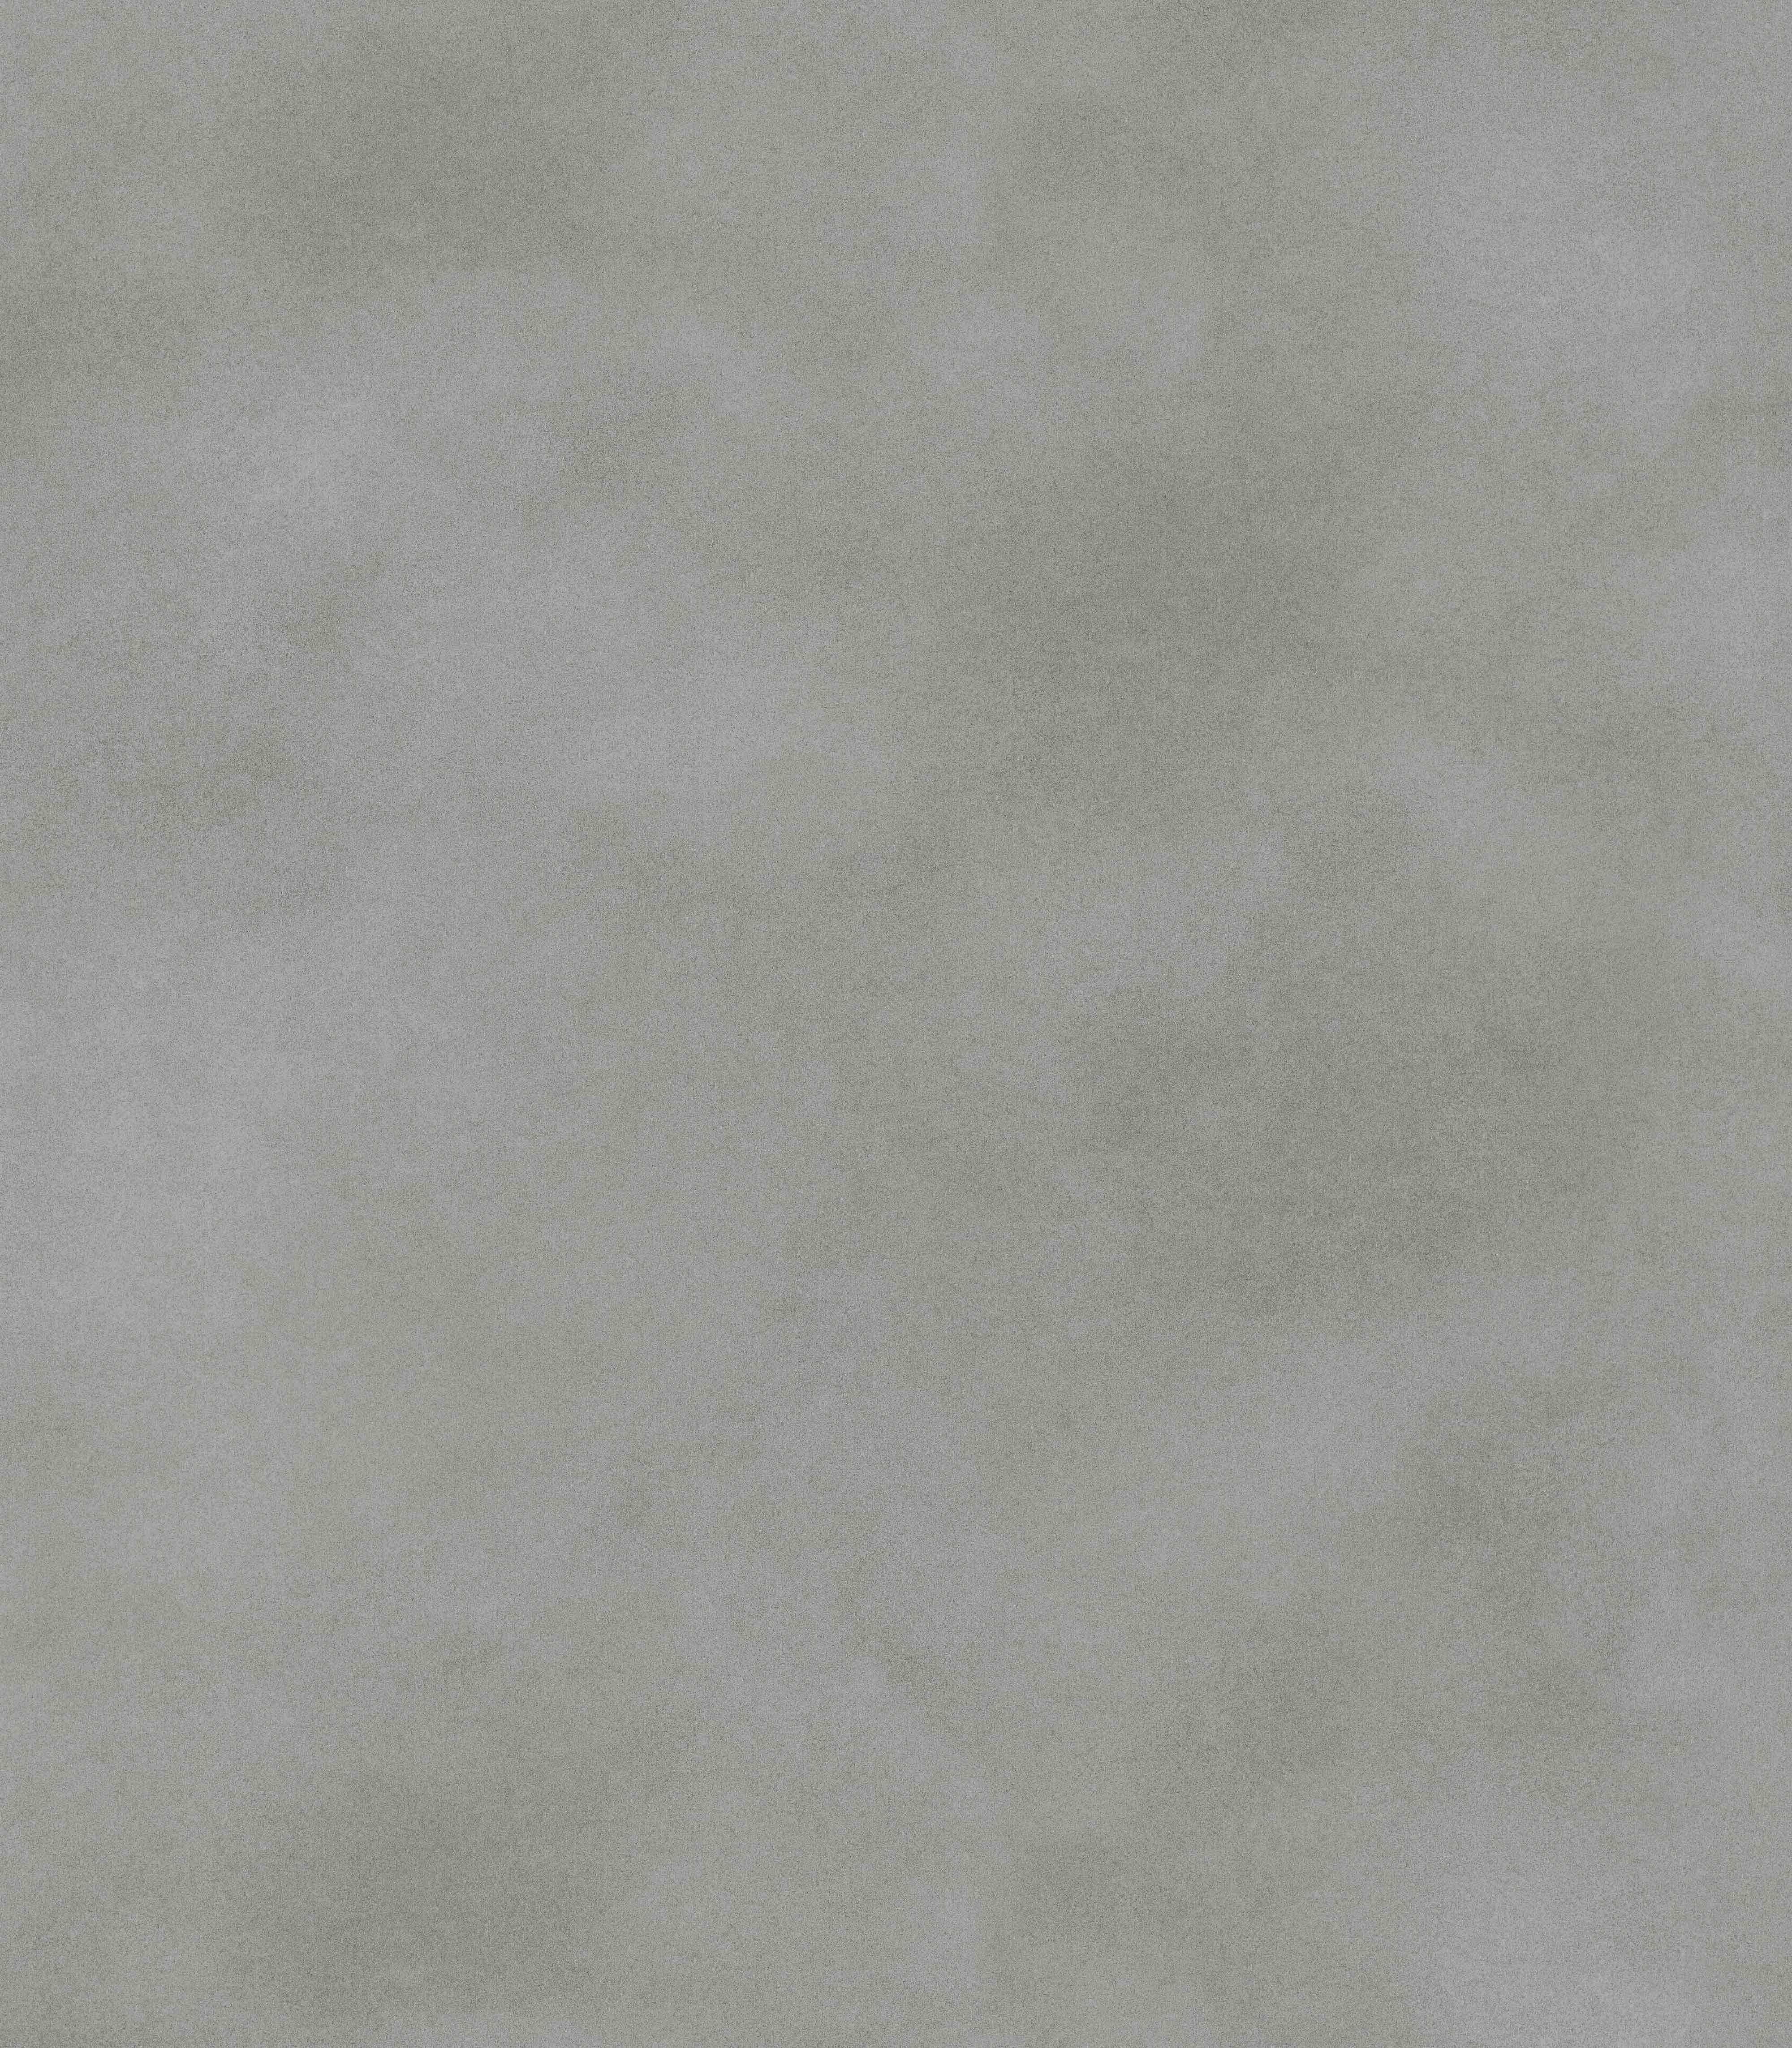 Paragon Duera 5mm Stone Plank Alloyed Cement 304.8 X 609.6 mm